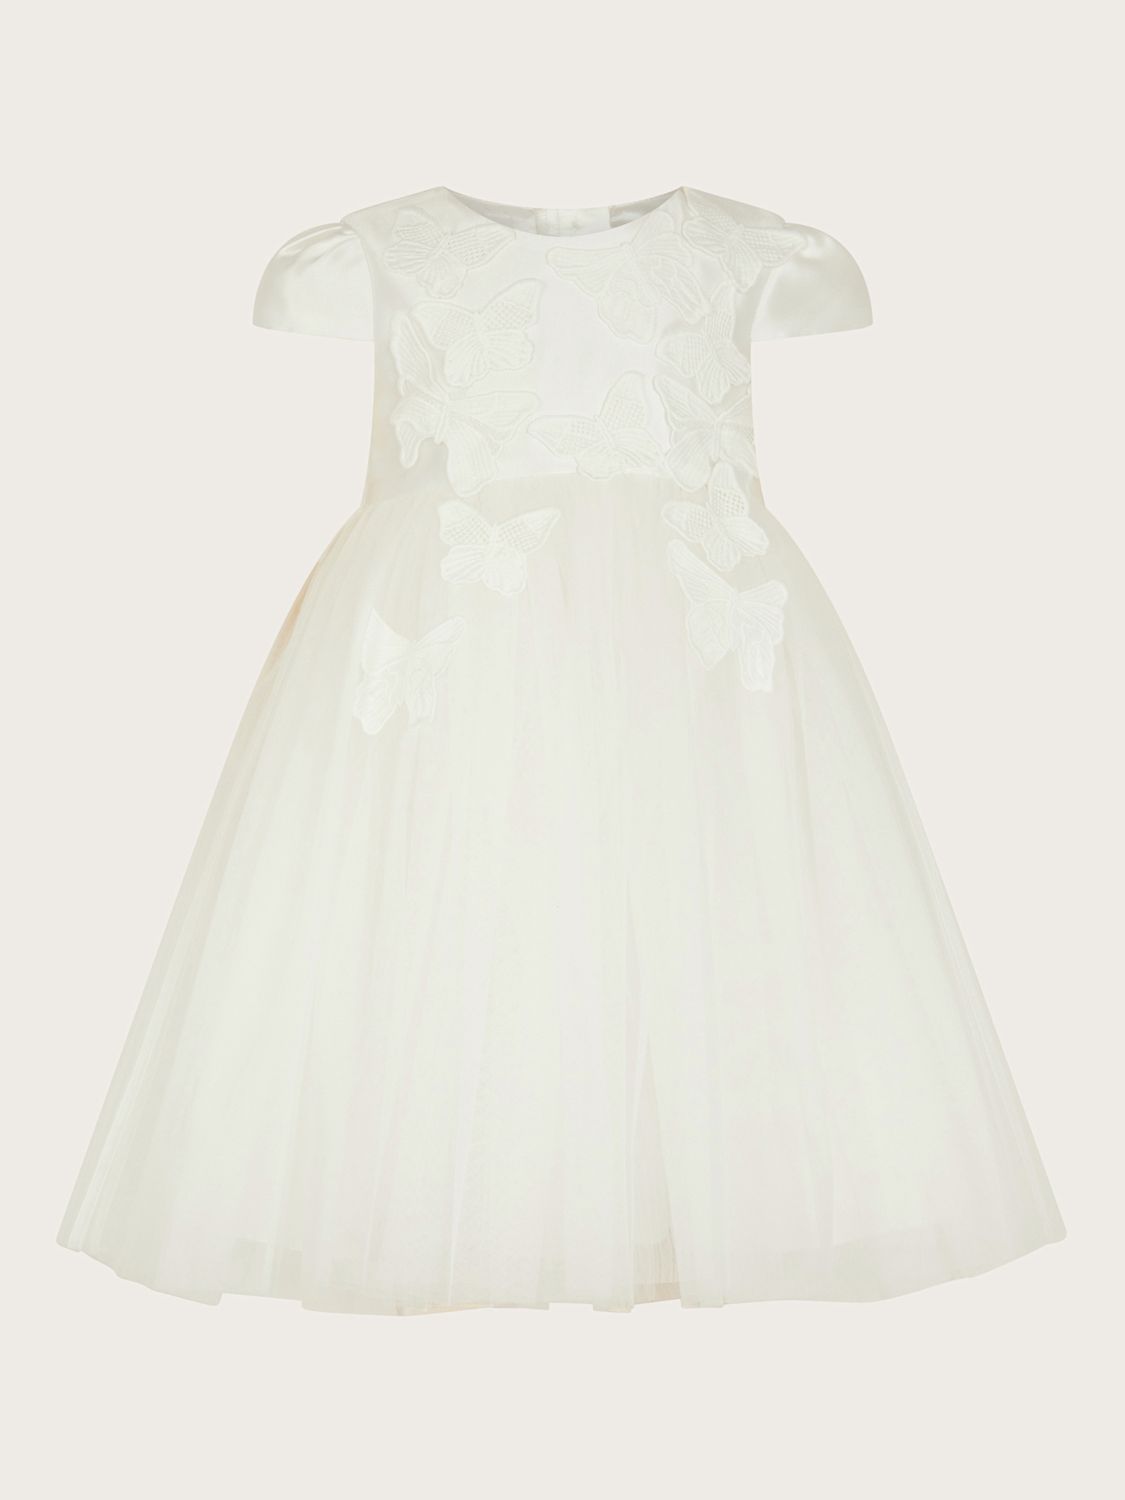 Monsoon Baby Butterfly Florish 3D Occasion Dress, Ivory, 0-3 months